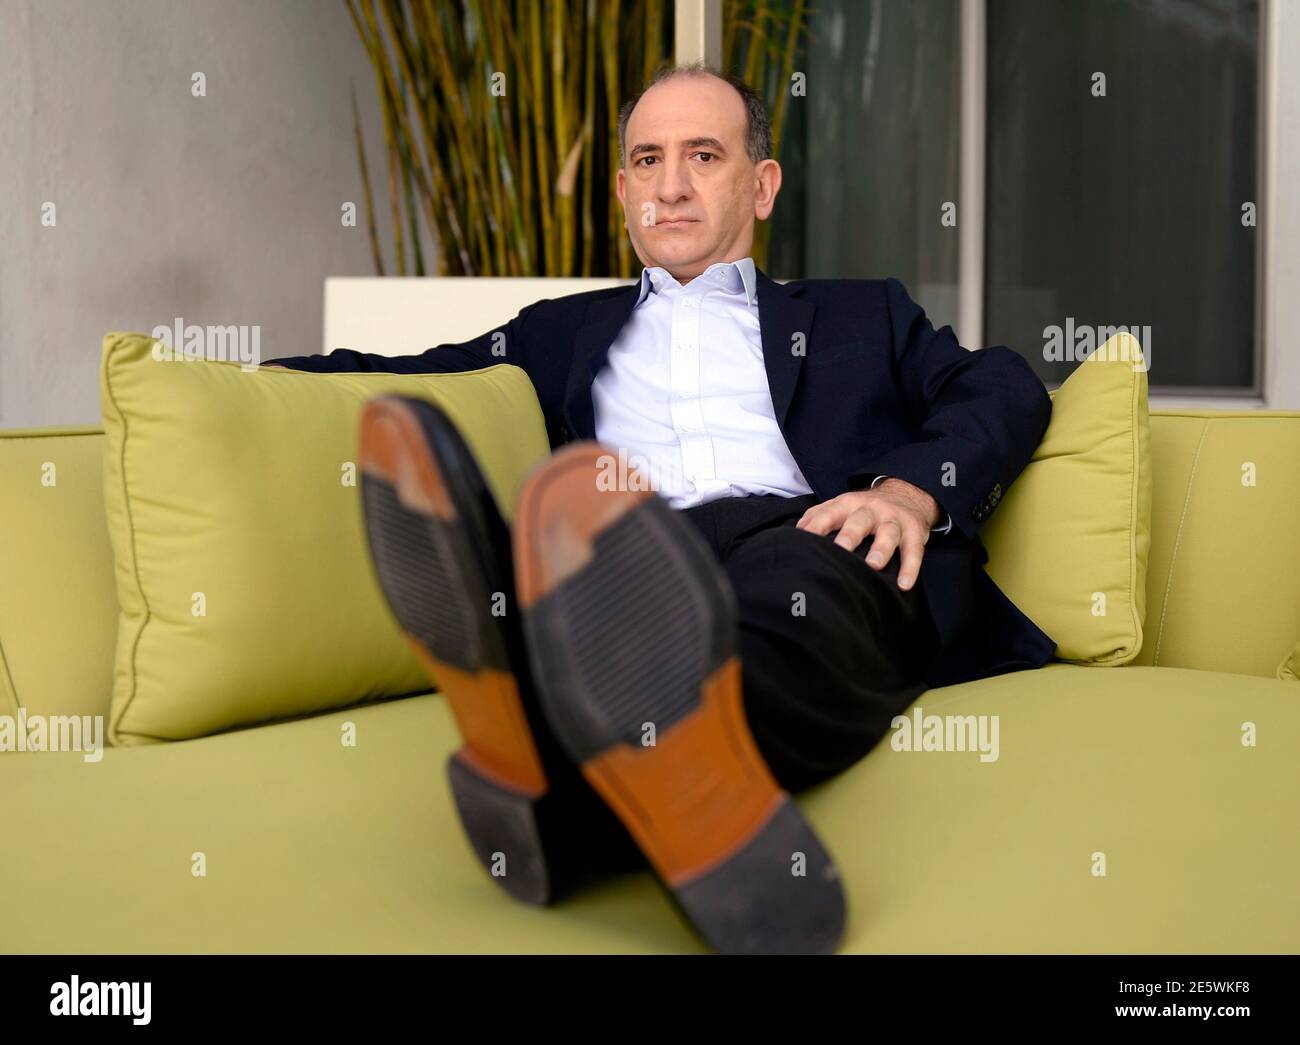 Armando Ianucci, creator and executive producer of HBO series 'Veep', poses at Sunset Marquis Hotel in West Hollywood, California, March 26, 2014. 'Veep' the send-up of political ambition in the Washington fishbowl, enters its third season on April 6 with Vice President Selina Meyer eyeing another run for the presidency. Picture taken March 26. REUTERS/Kevork Djansezian  (UNITED STATES - Tags: ENTERTAINMENT PORTRAIT) Stock Photo